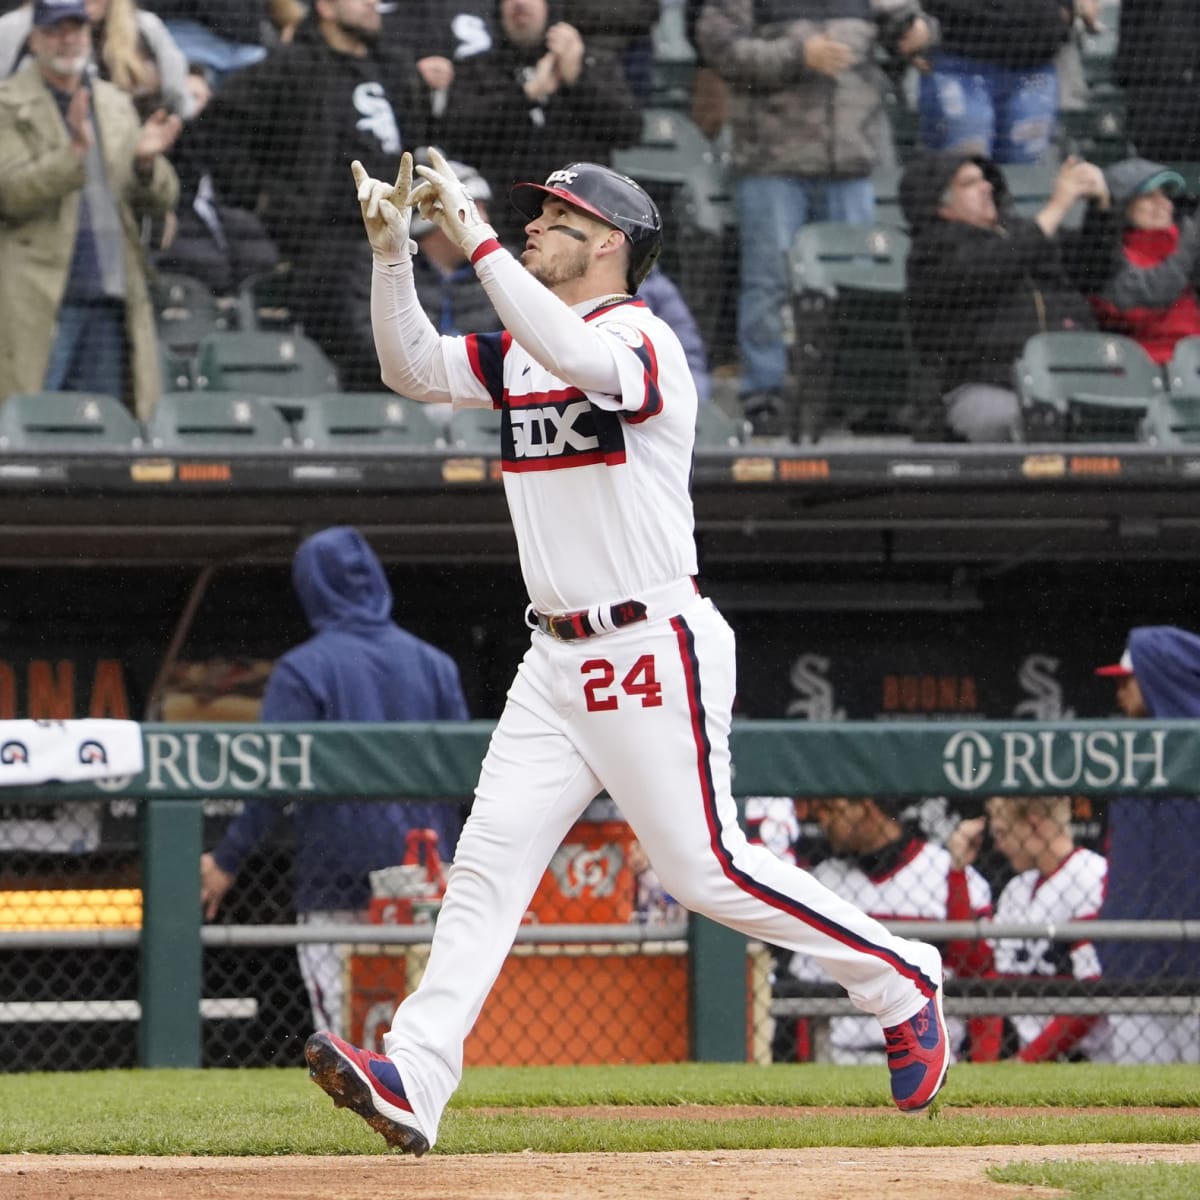 Chicago White Sox snap 10-game skid with 7-run 9th inning